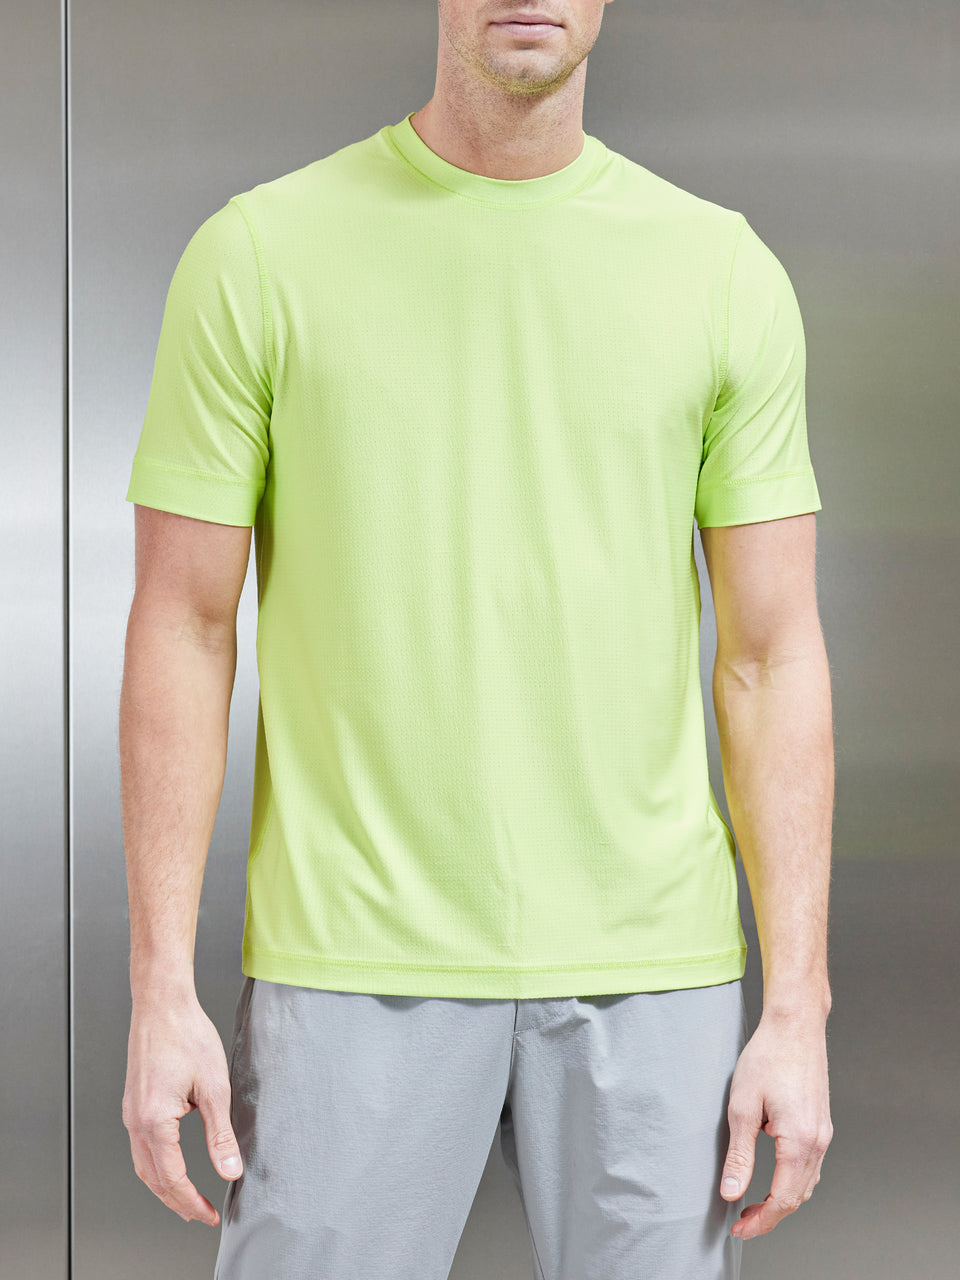 Performance T-Shirt in Neon Green